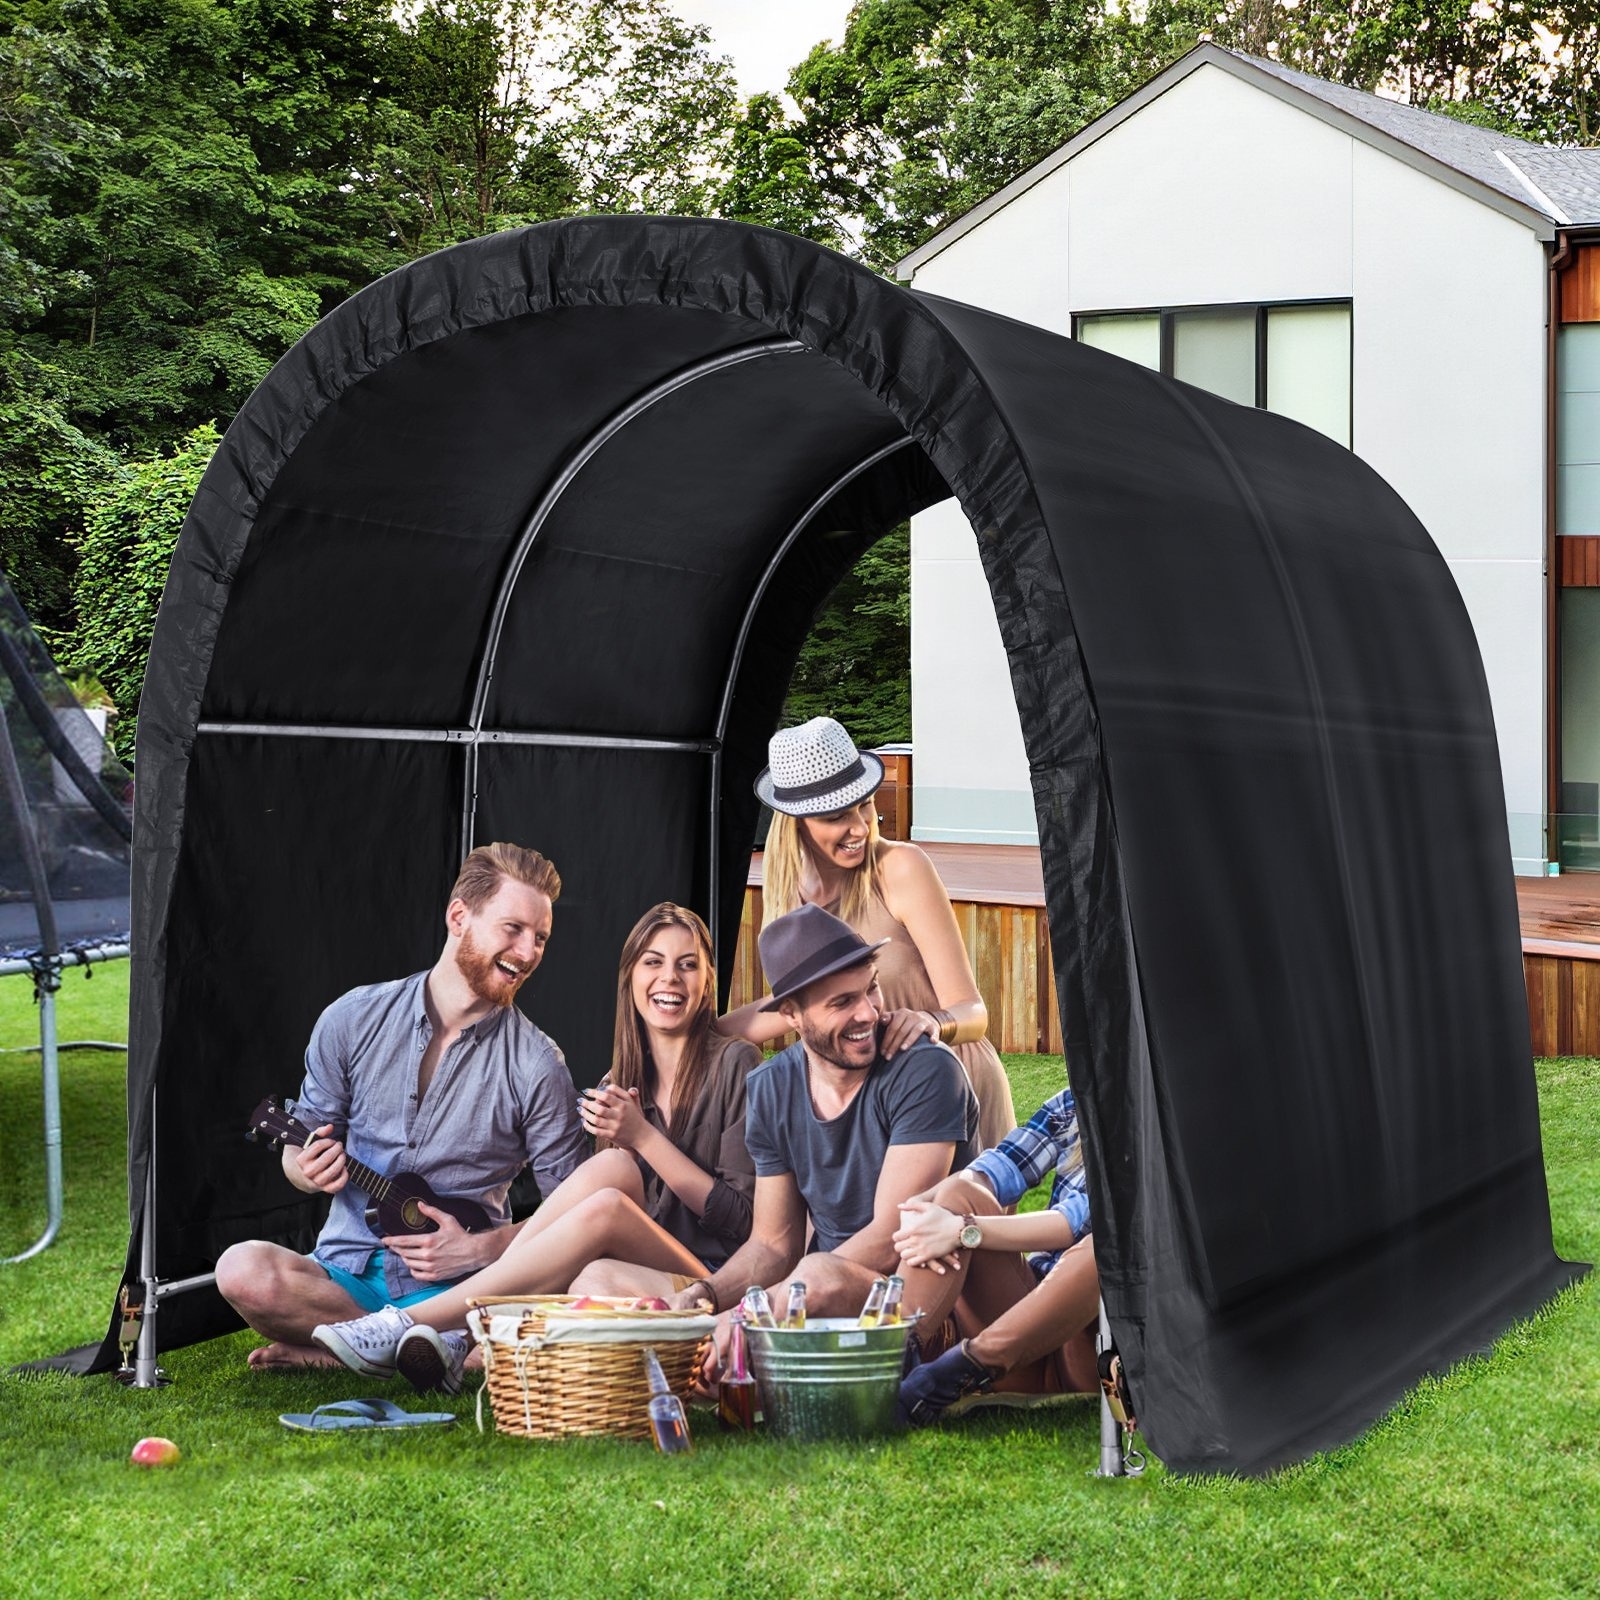 EROMMY 8 x Heavy Duty Storage Tent, Tool Shed, Carport, Portable Garage for Patio, Garden, Black - 8*8*6.8 FT - On - Overstock - 37388211